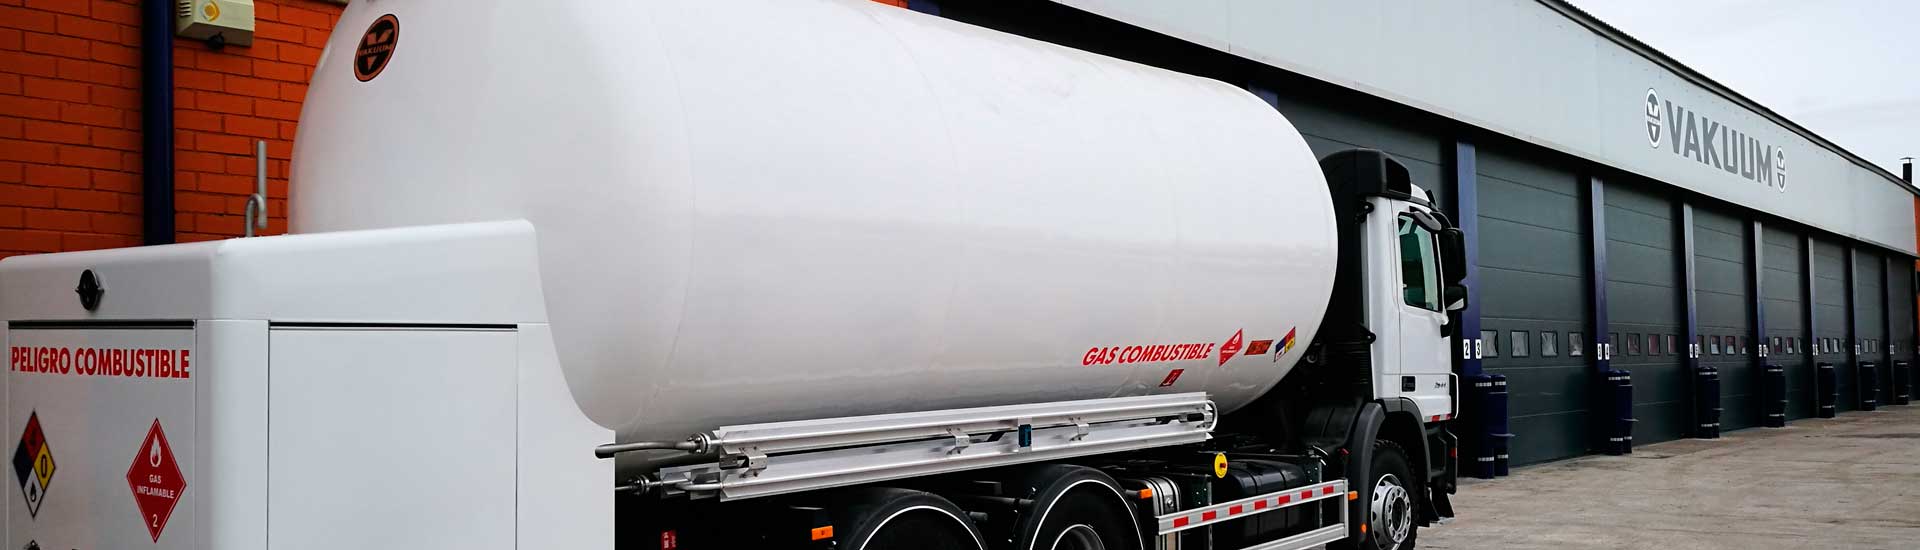 Vakuum delivery tanks for the small distribution of Liquefied Natural Gas and industrial gases